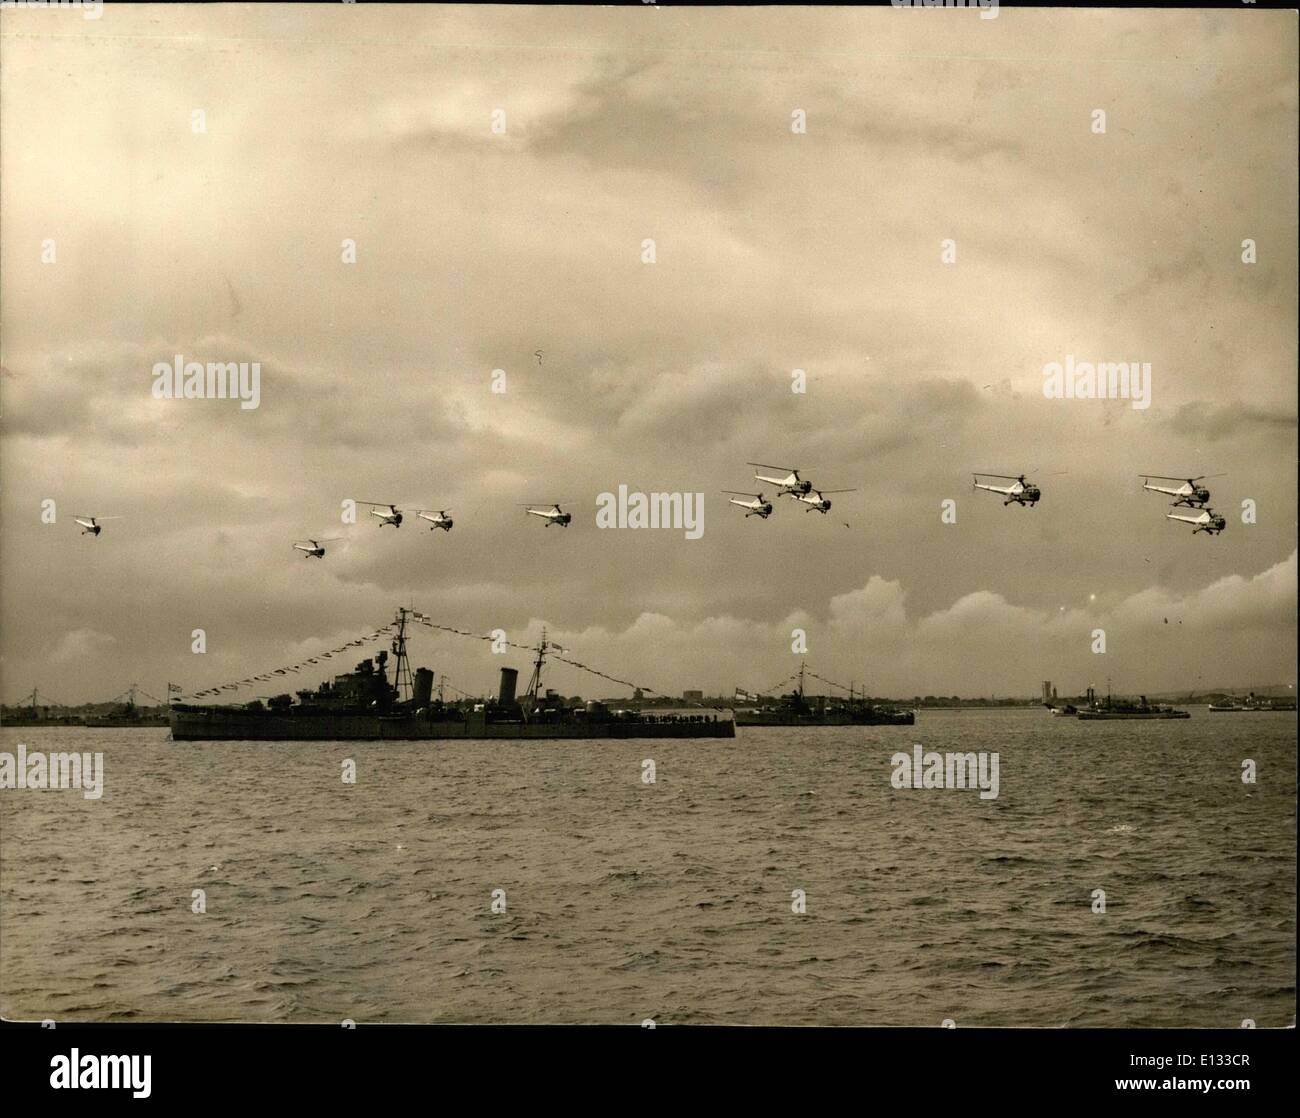 Feb. 26, 2012 - Hover planes Salute the Queen.The British Cruiser HMS Glasgow (9, 100 tons) Shows Hover planes flying in Formation during the flypast salute made by 300 Naval Planes at the 300 Warship Coronation Naval Review at Spithead today. Stock Photo